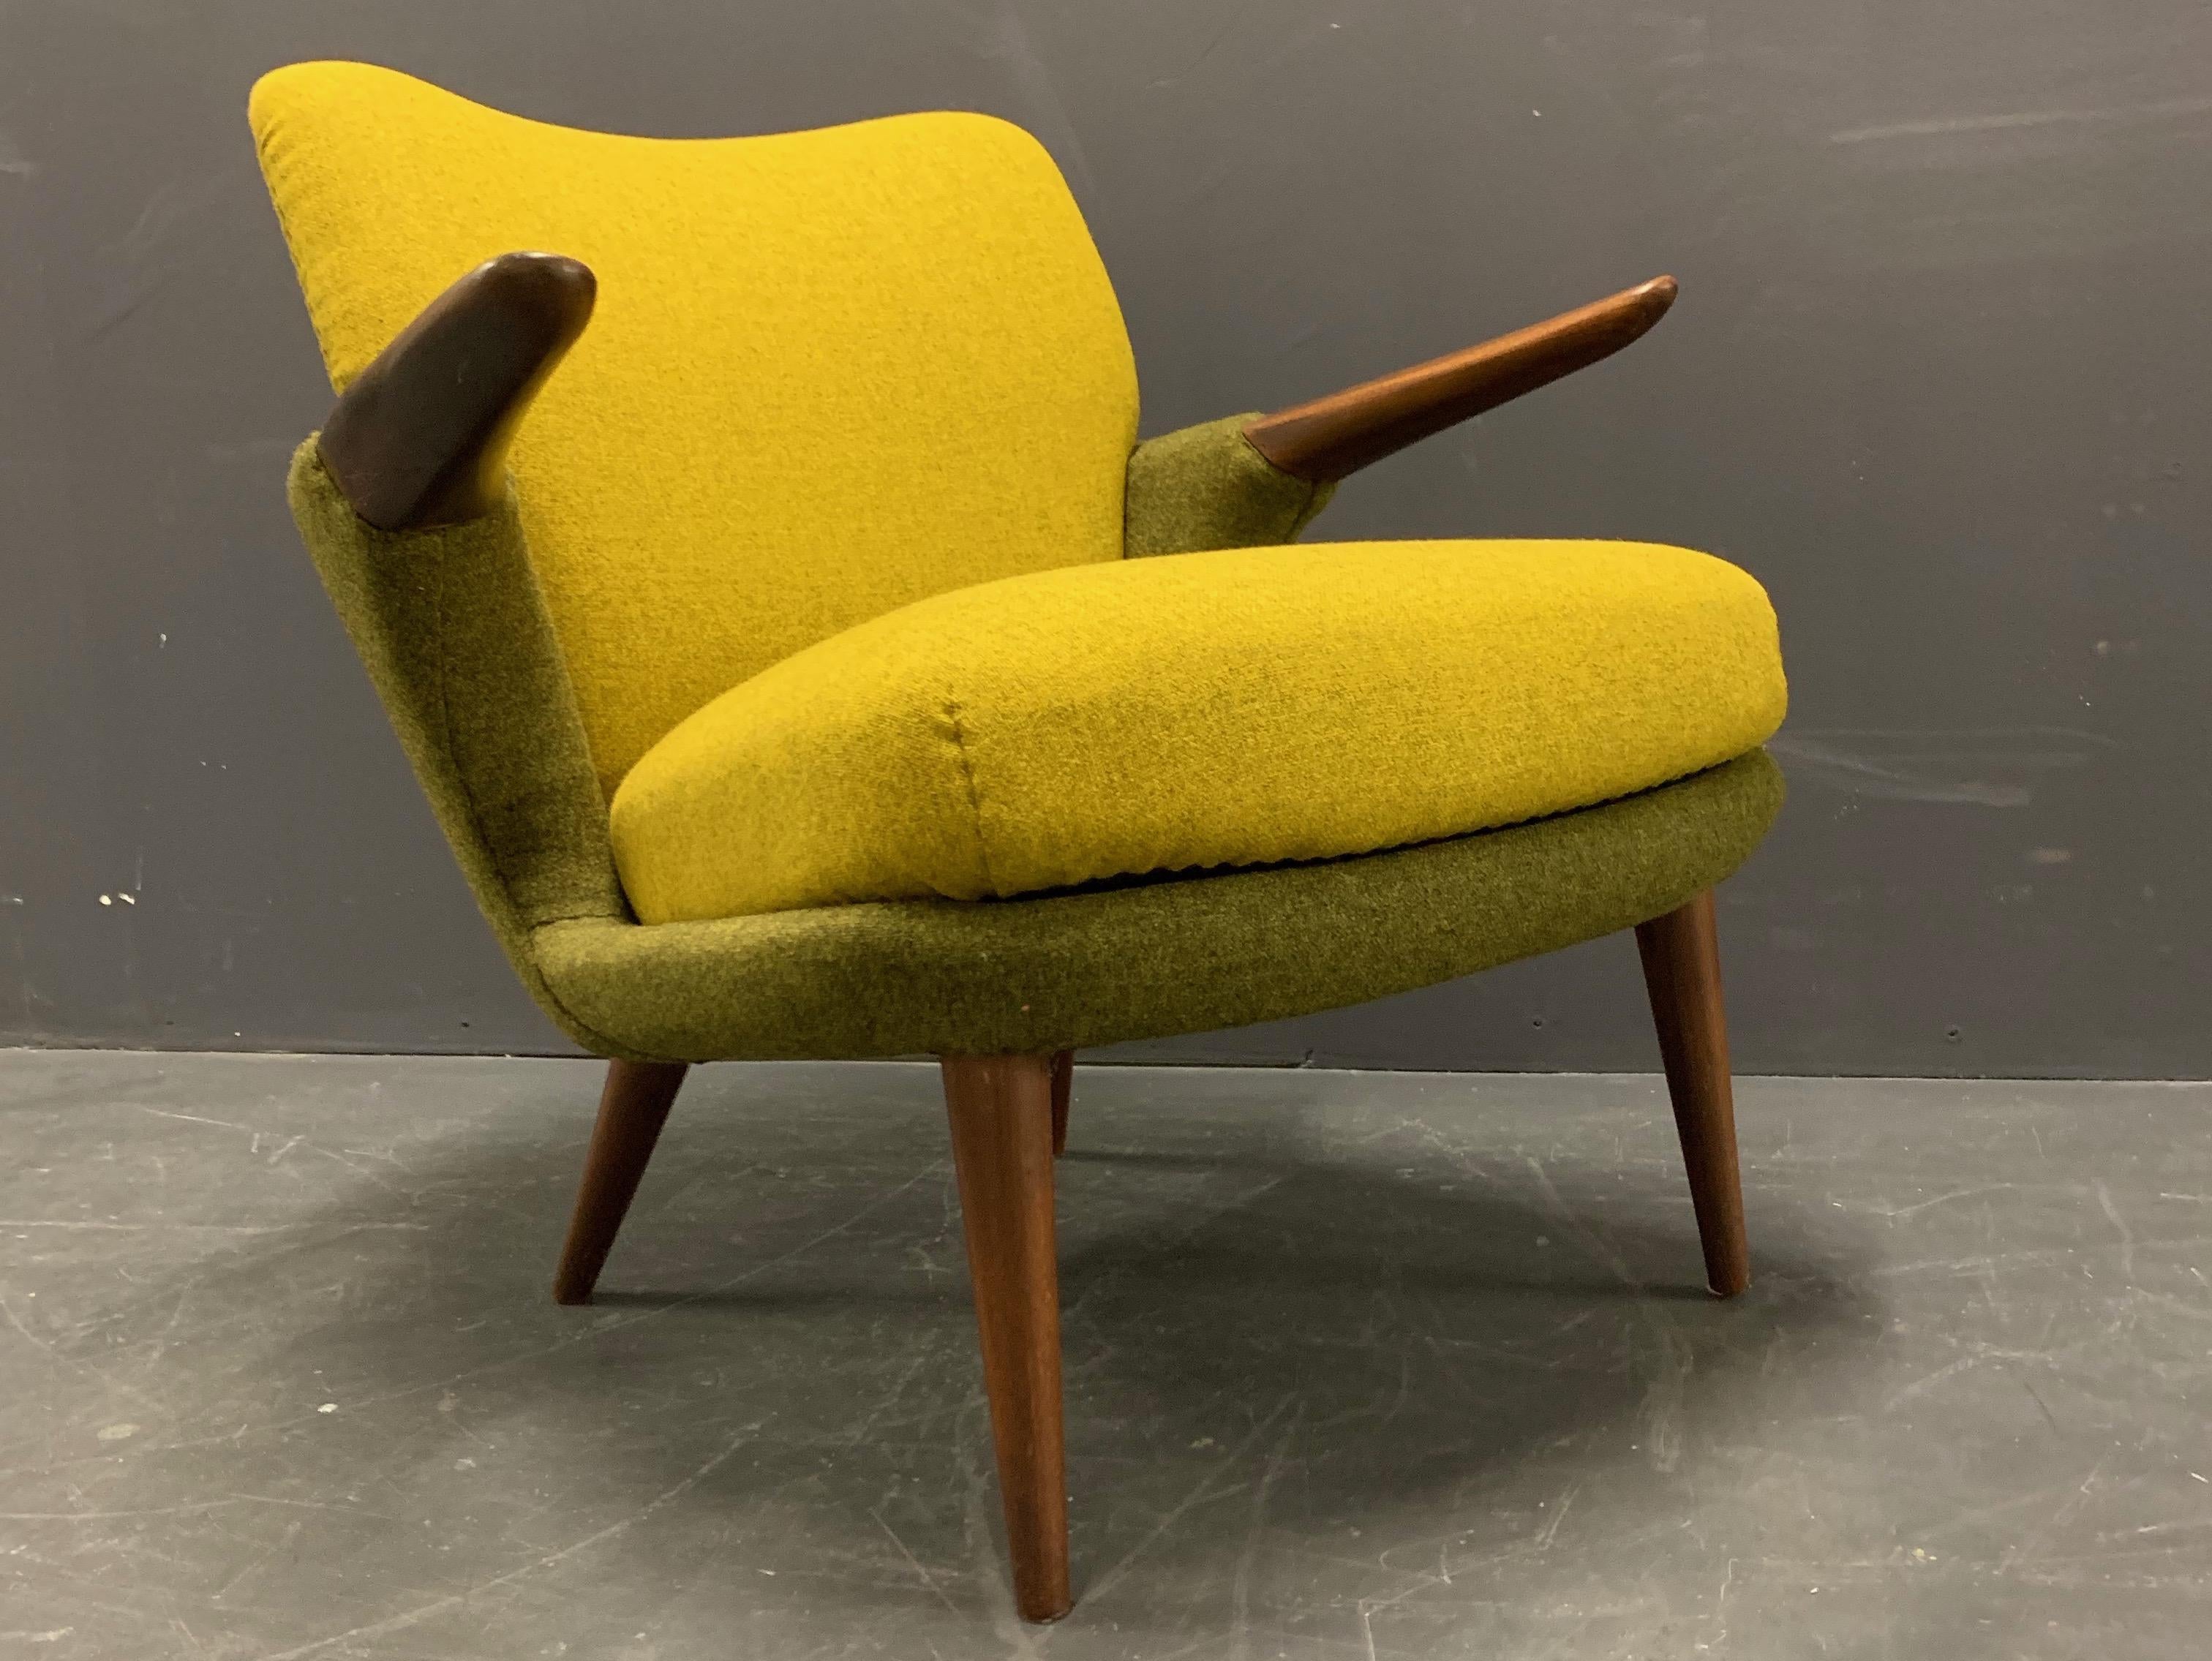 Designed in 1954. The only chair that is known to exist. Made by Christensen and Larsen. A different version of the chair is shown in the famous Grete Jalk books 